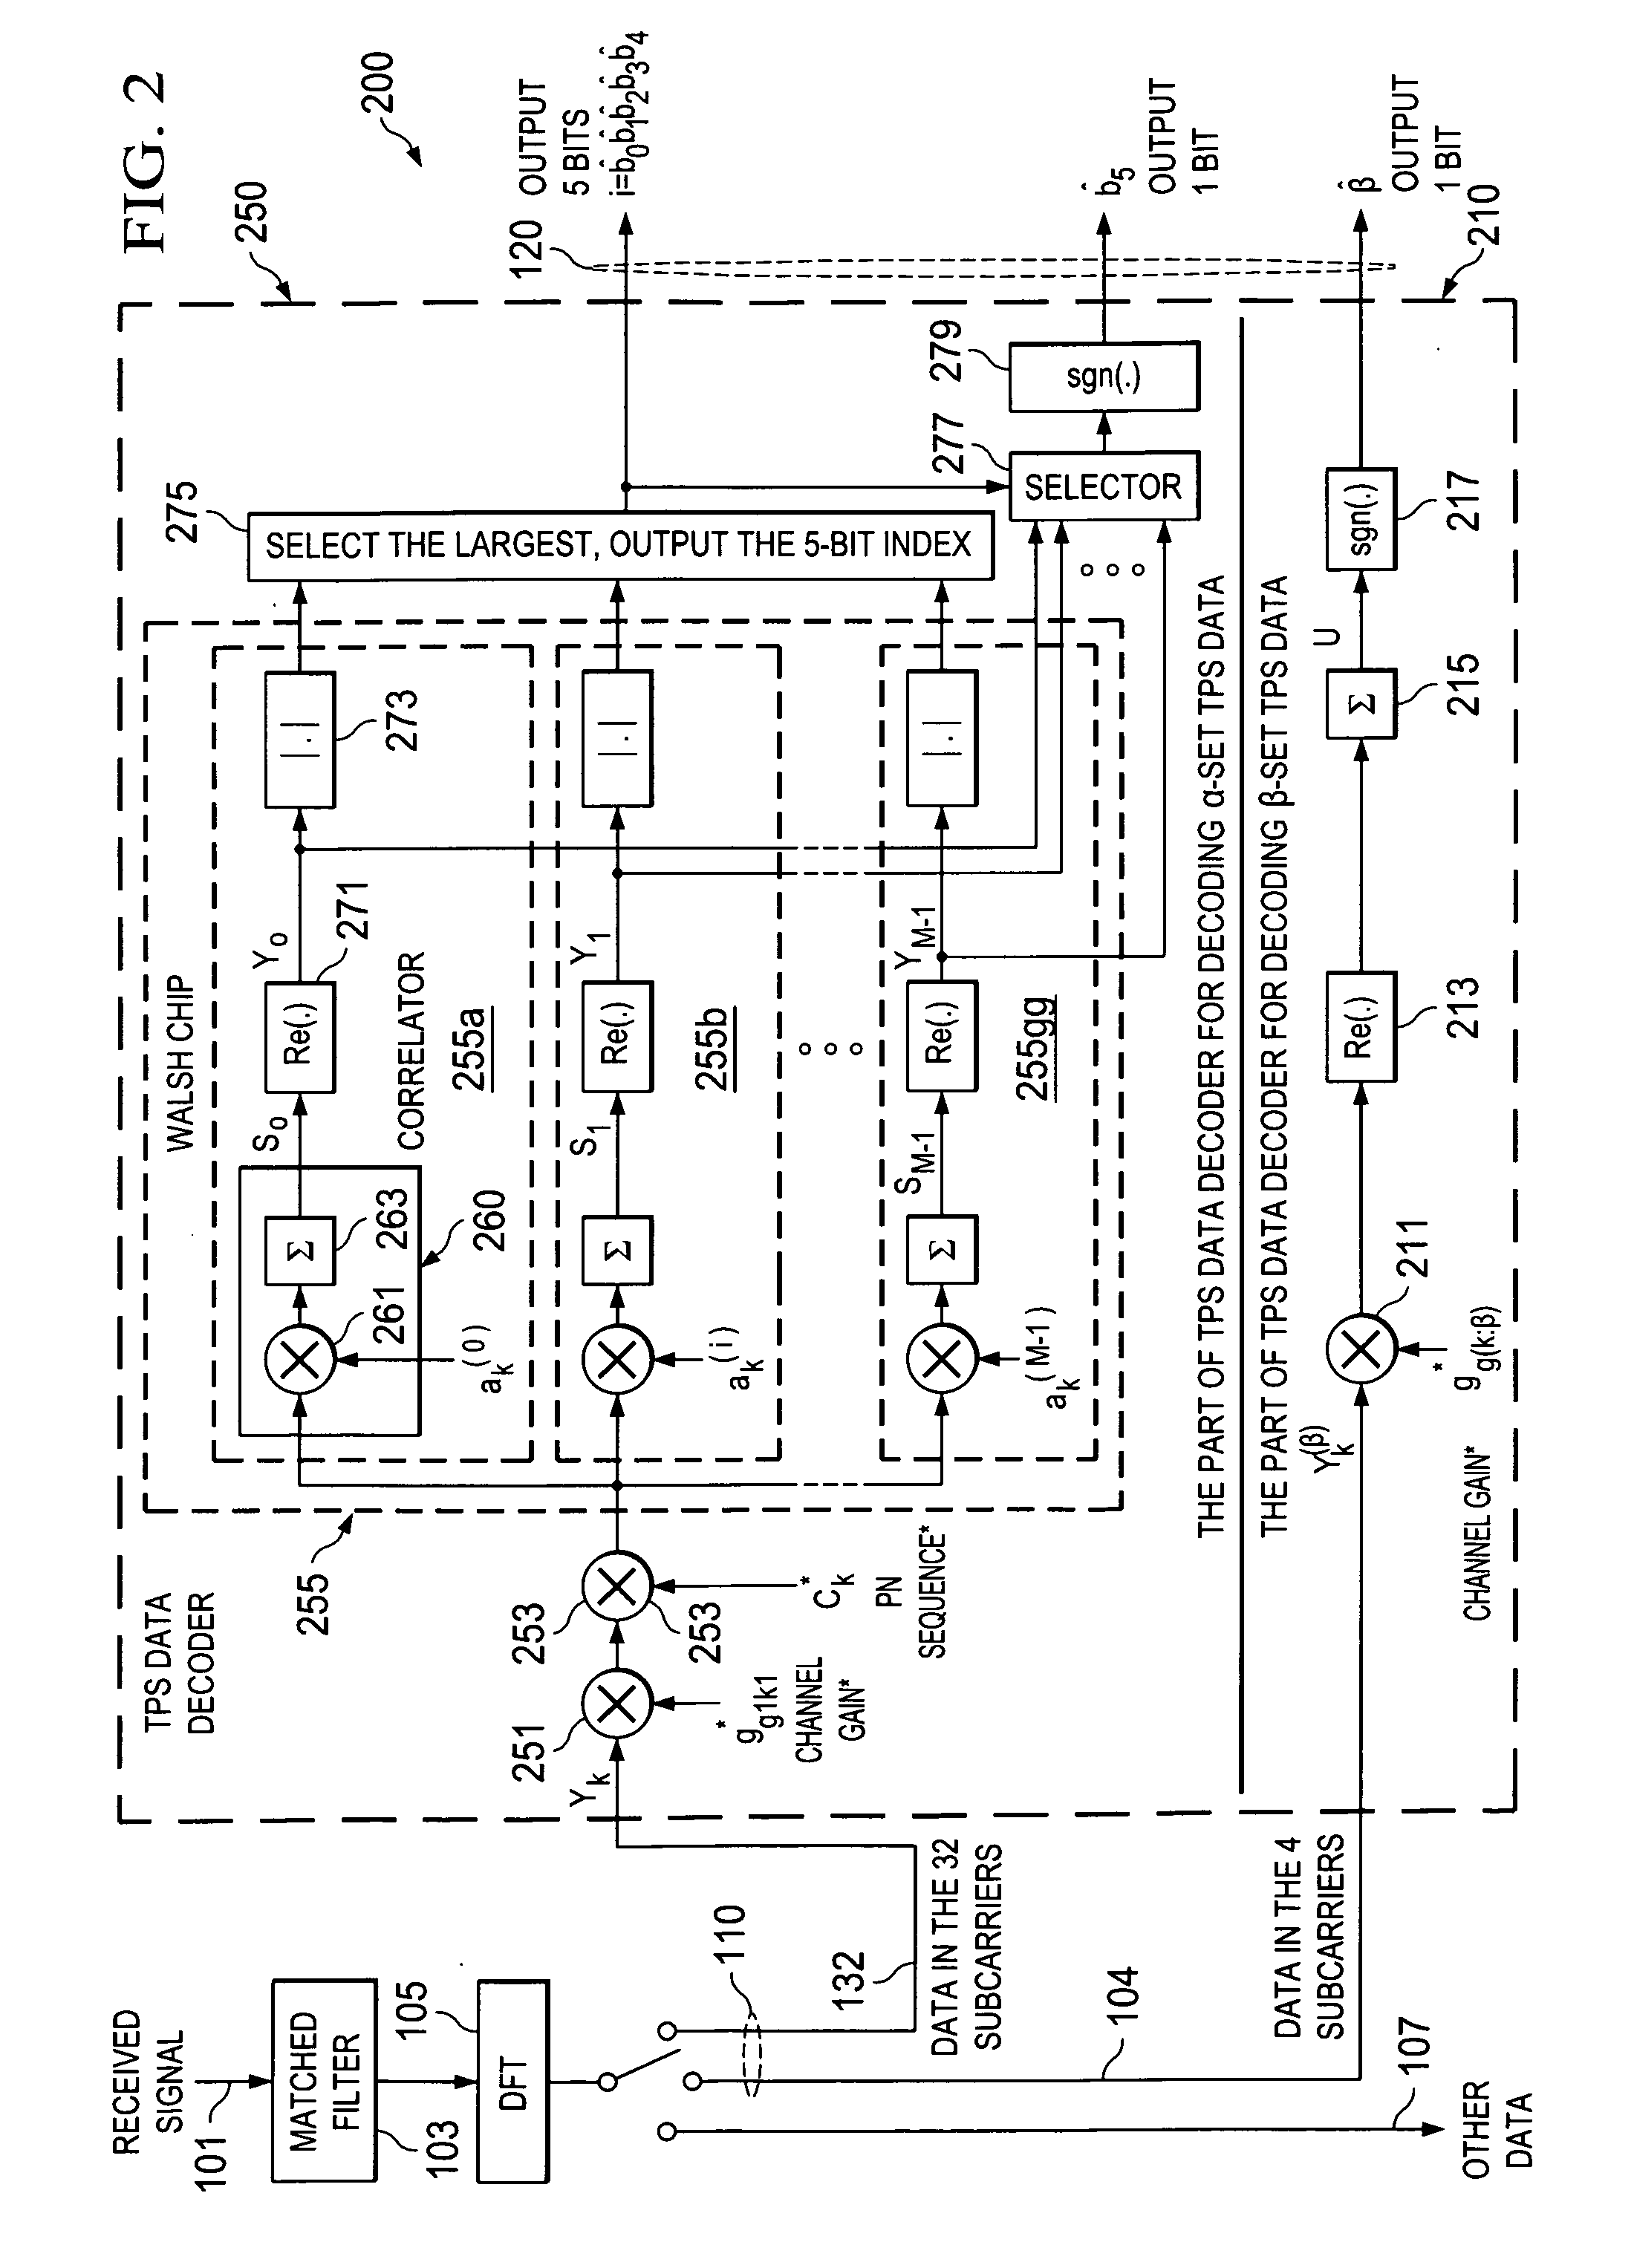 Reliability detector for tps data decoding, particularly in digital televisions